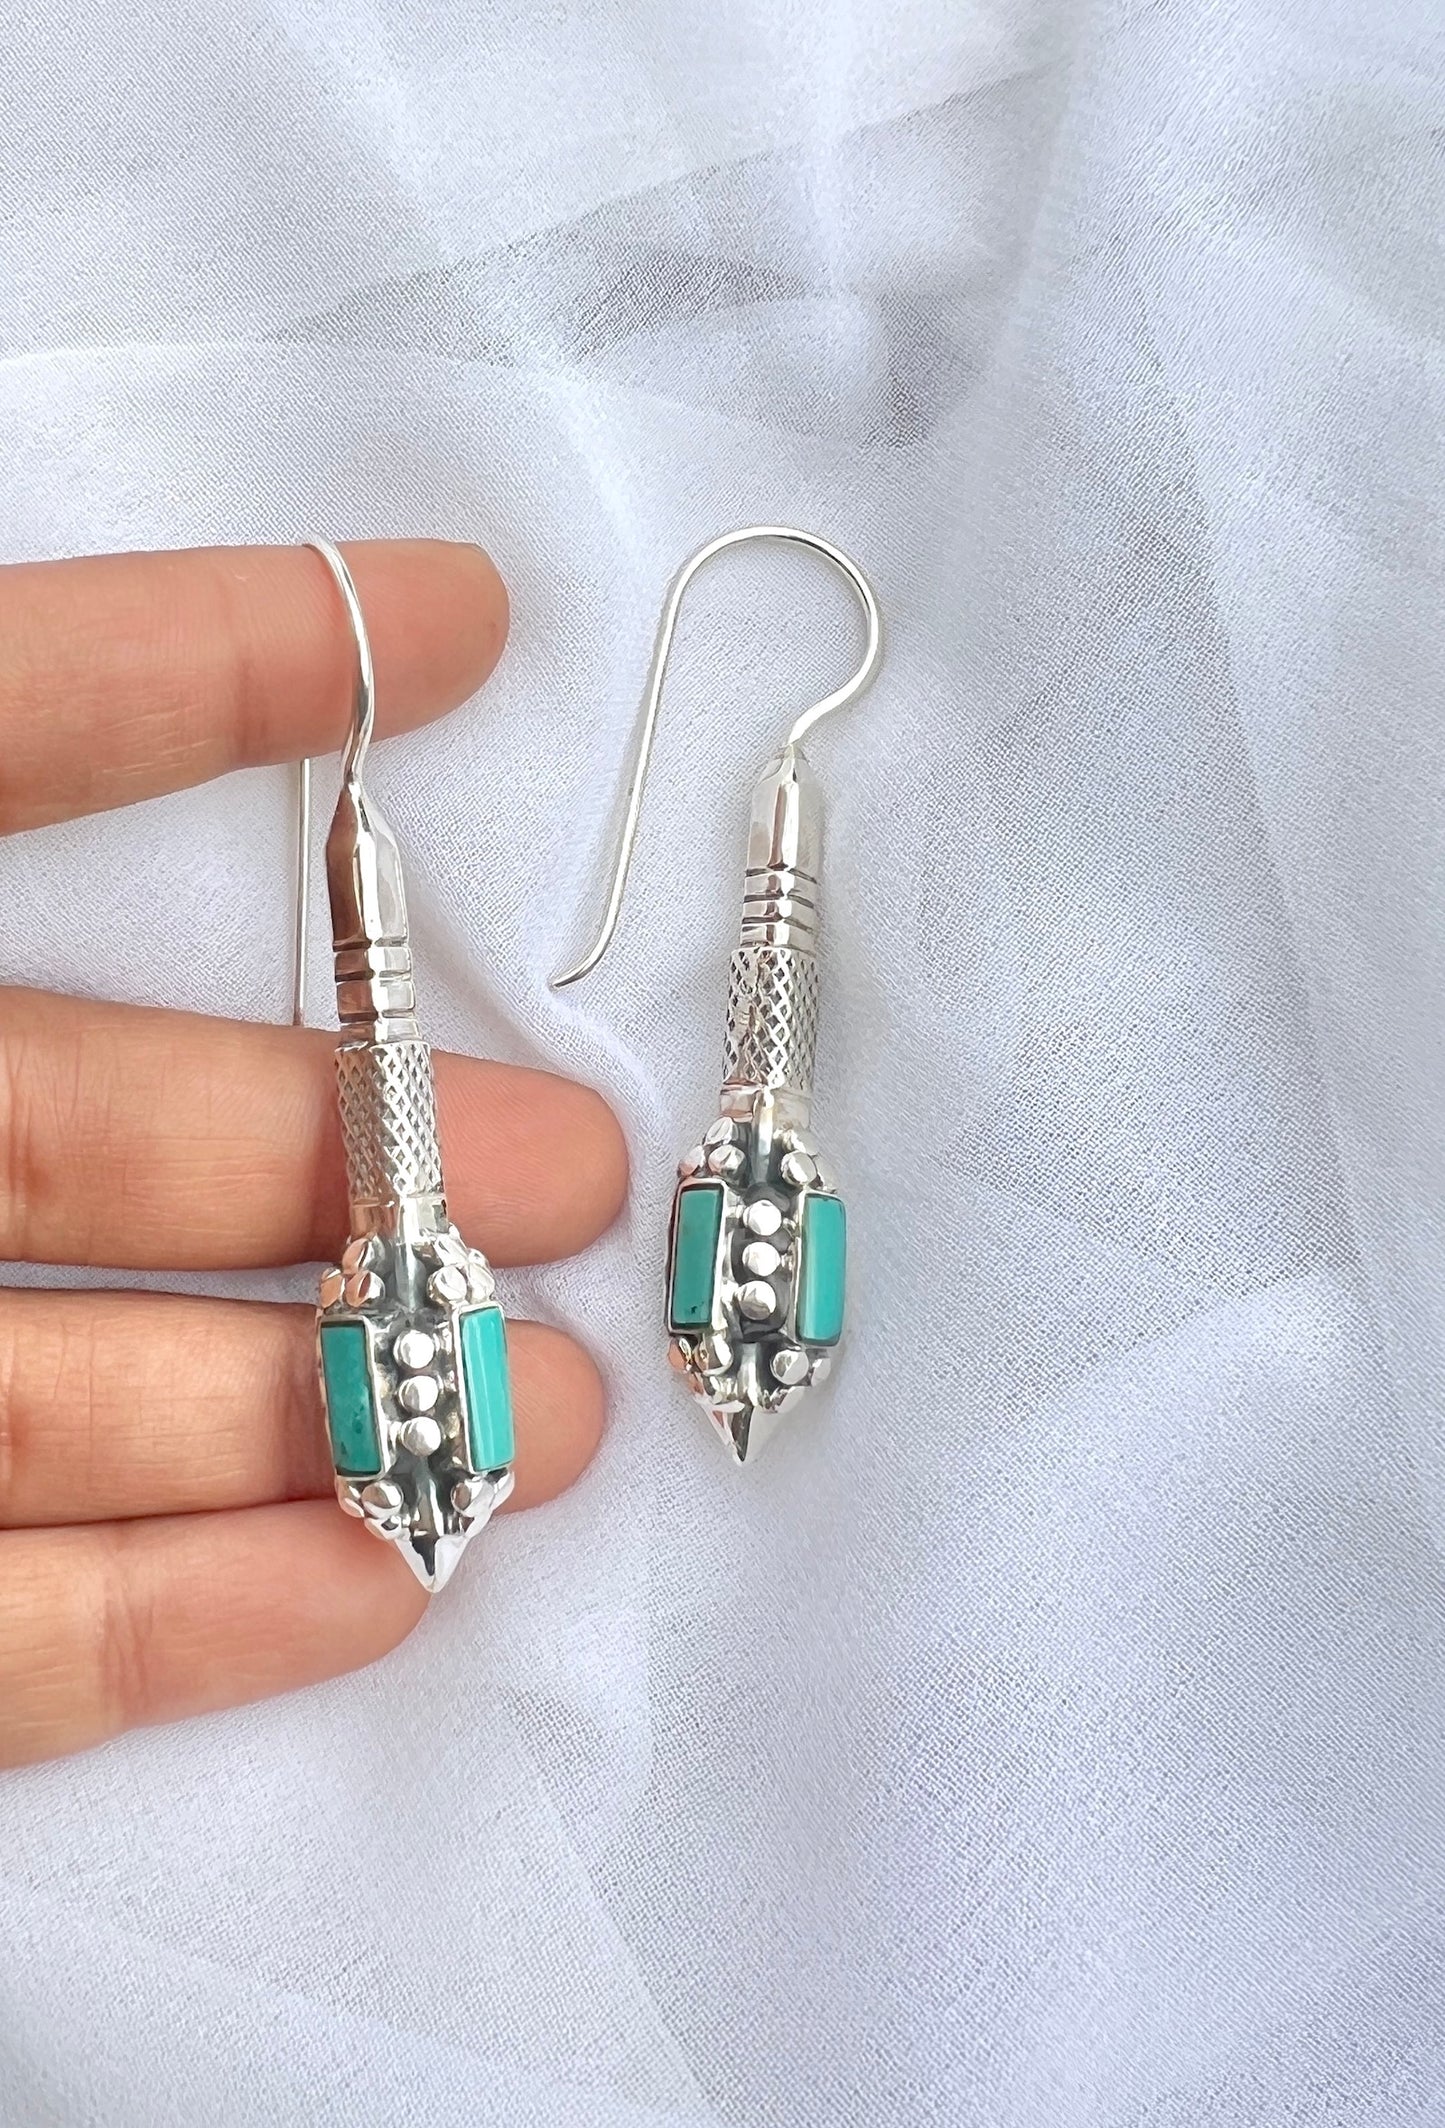 Turquoise Drops - 925 silver